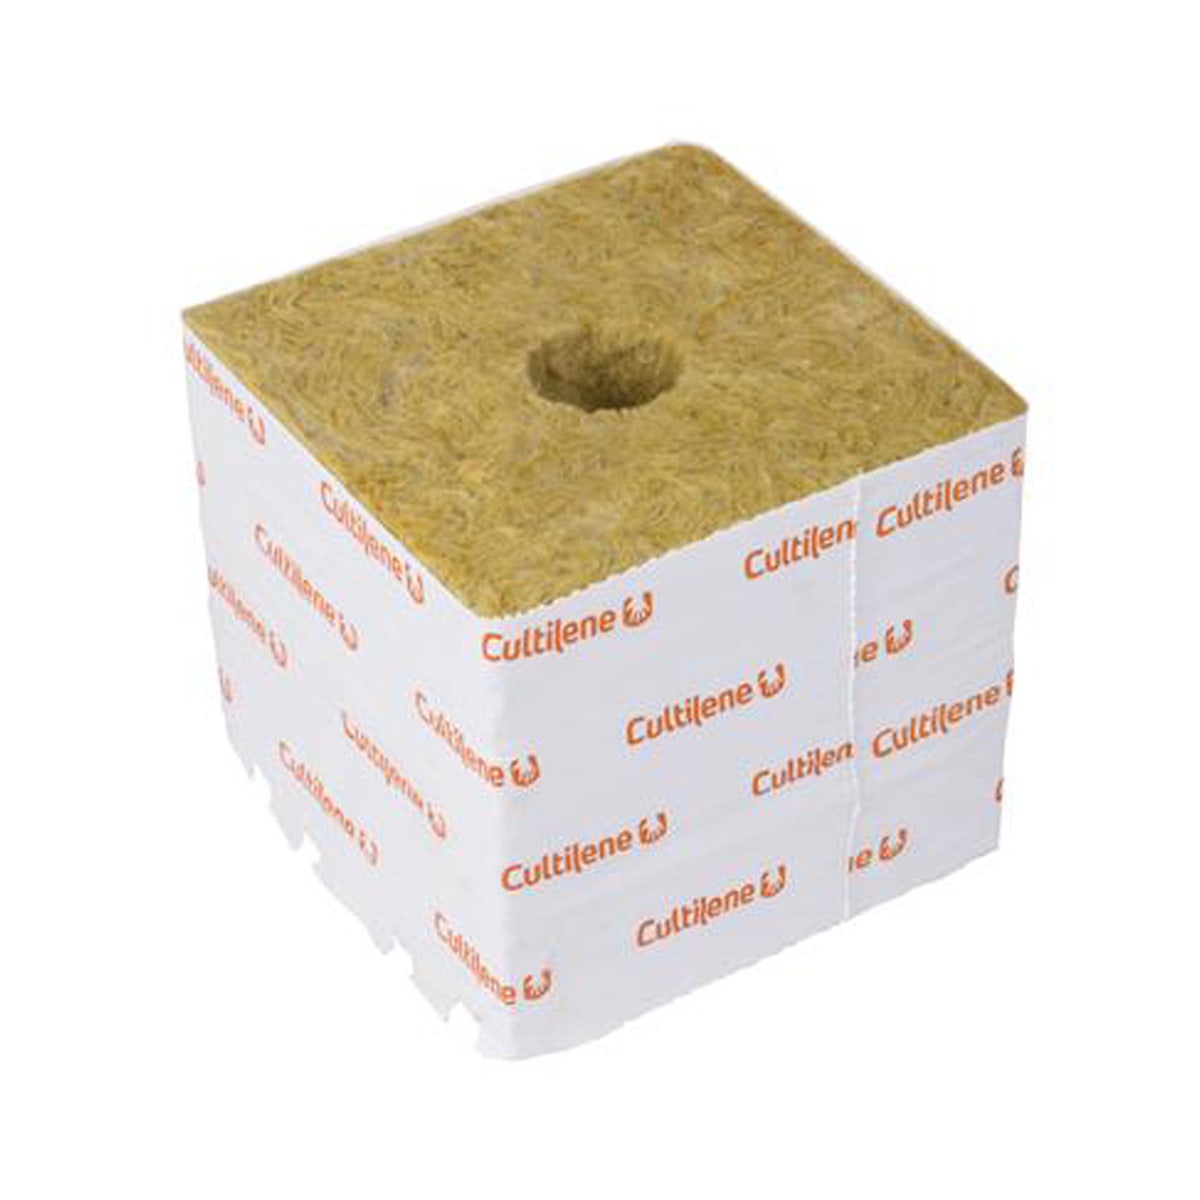 Cultiwool Cubes